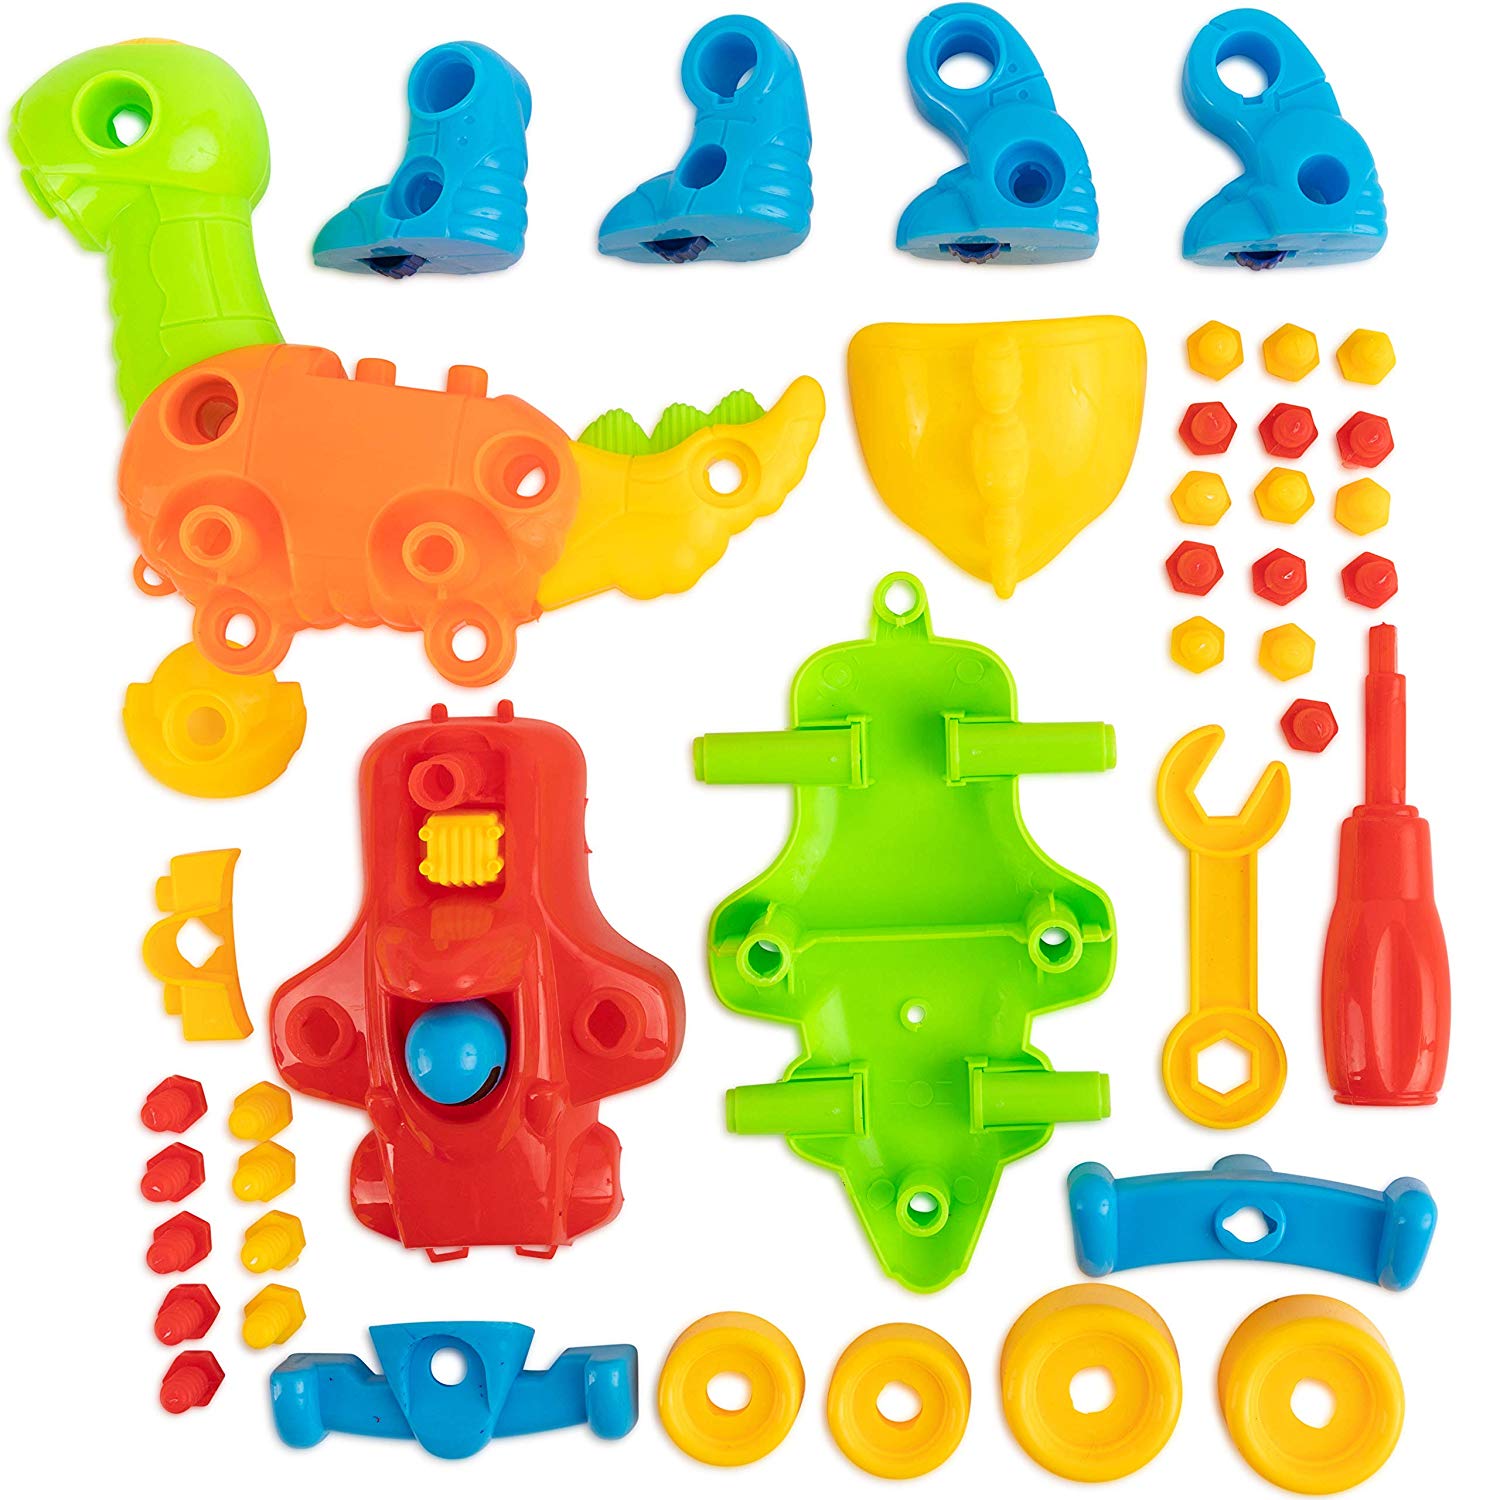 9 Take-Apart Toys With Tools